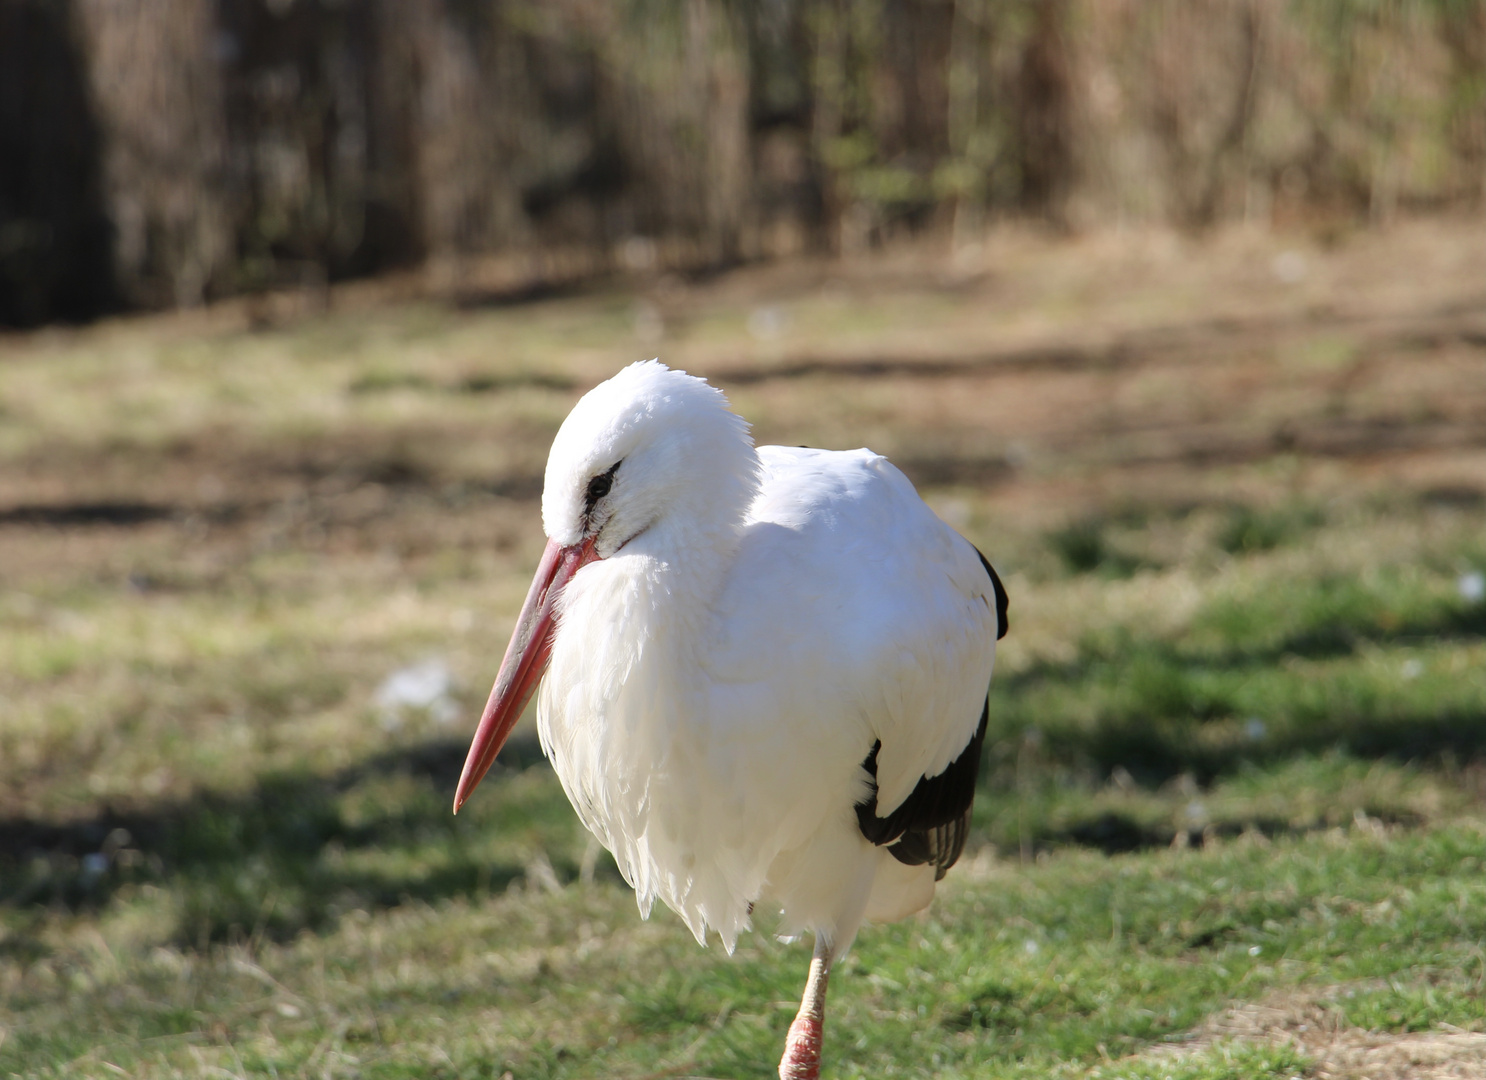 Storch 